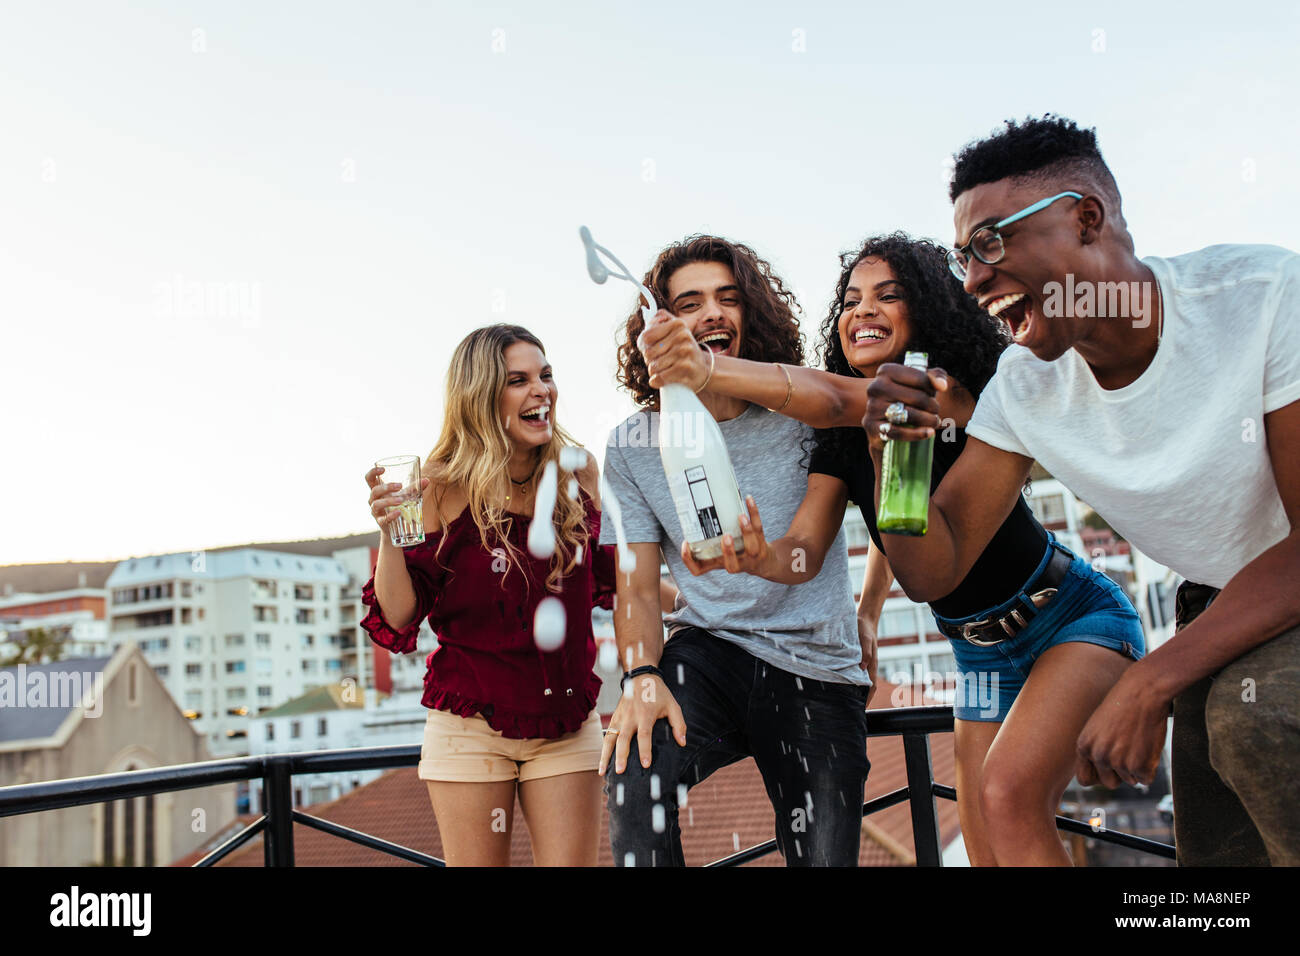 Outdoor shot of woman opening a bottle of champagne with friends enjoying. Group of friends having champagne at rooftop party. Stock Photo